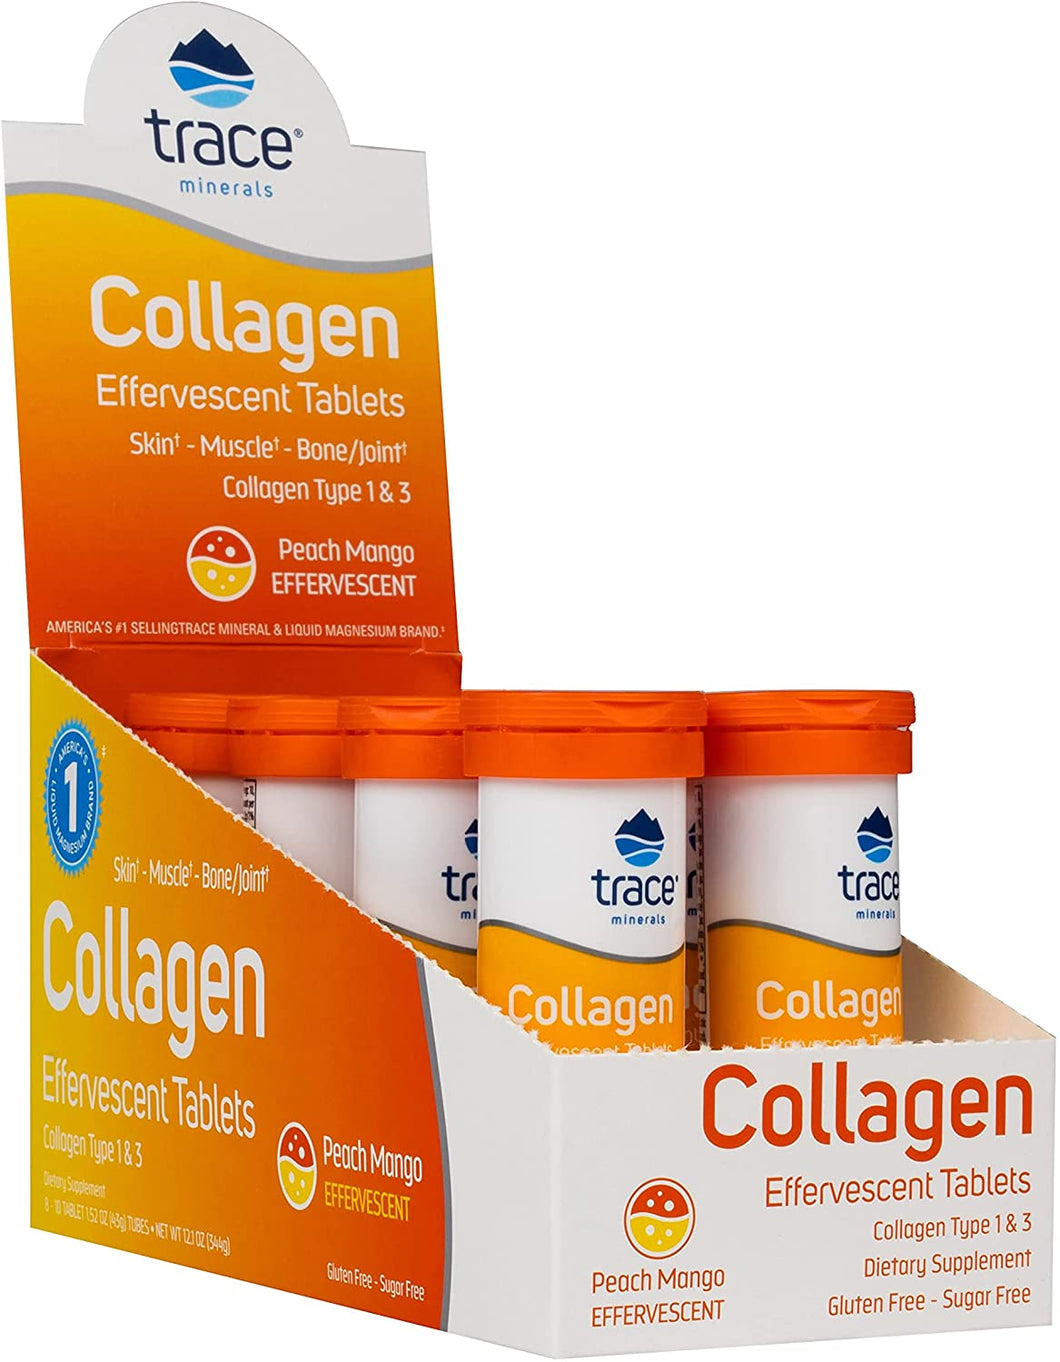 Collagen Effervescent Tablets 8 tubes by Trace Minerals Research